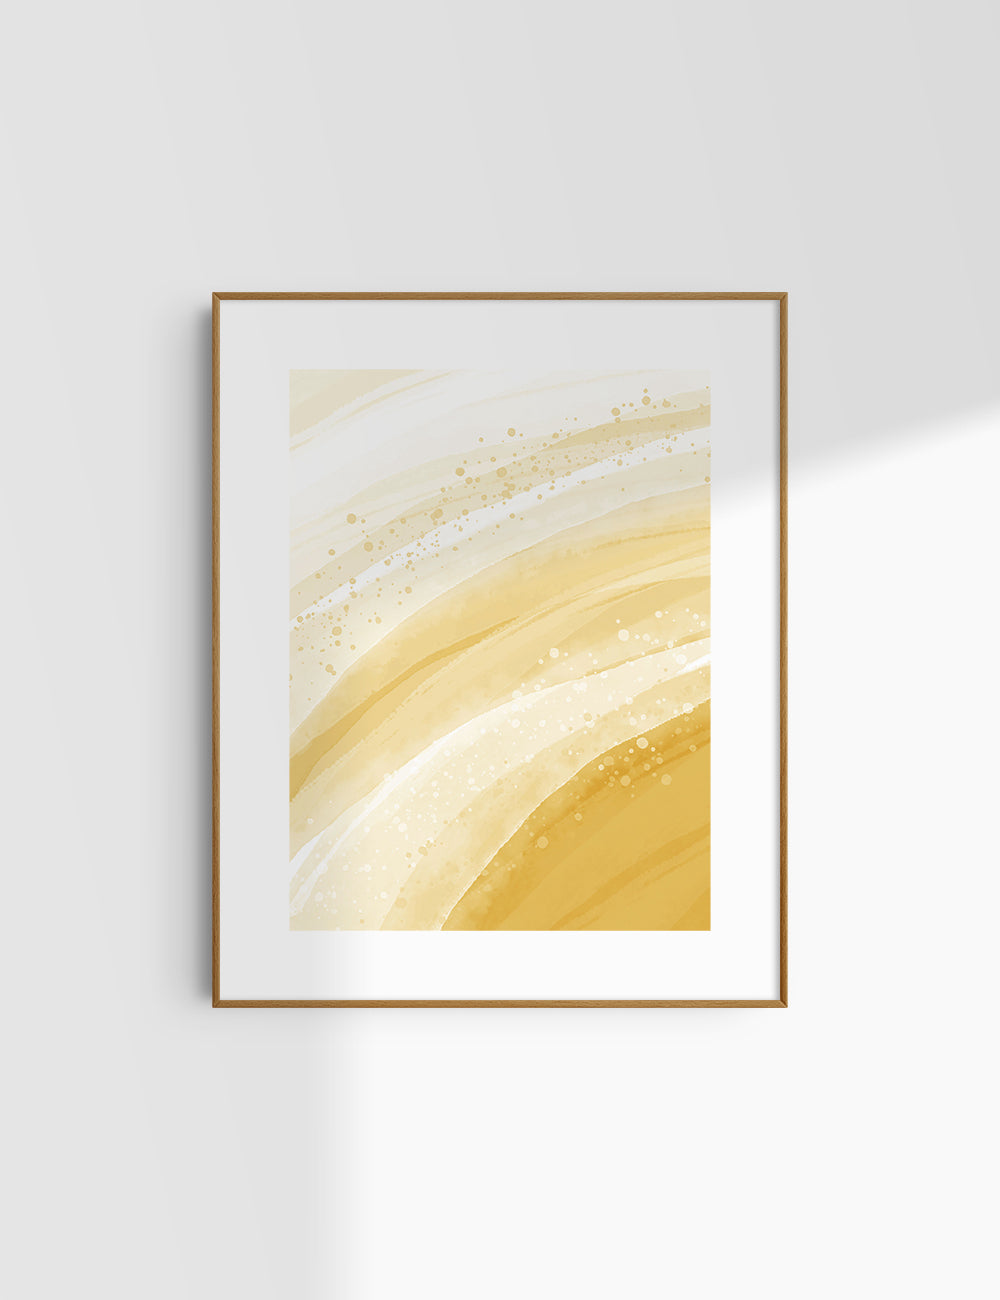 WATERCOLOR ABSTRACT. Yellow Aesthetic. Abstract Watercolor Painting. Printable Wall Art. - PAPER MOON Art & Design